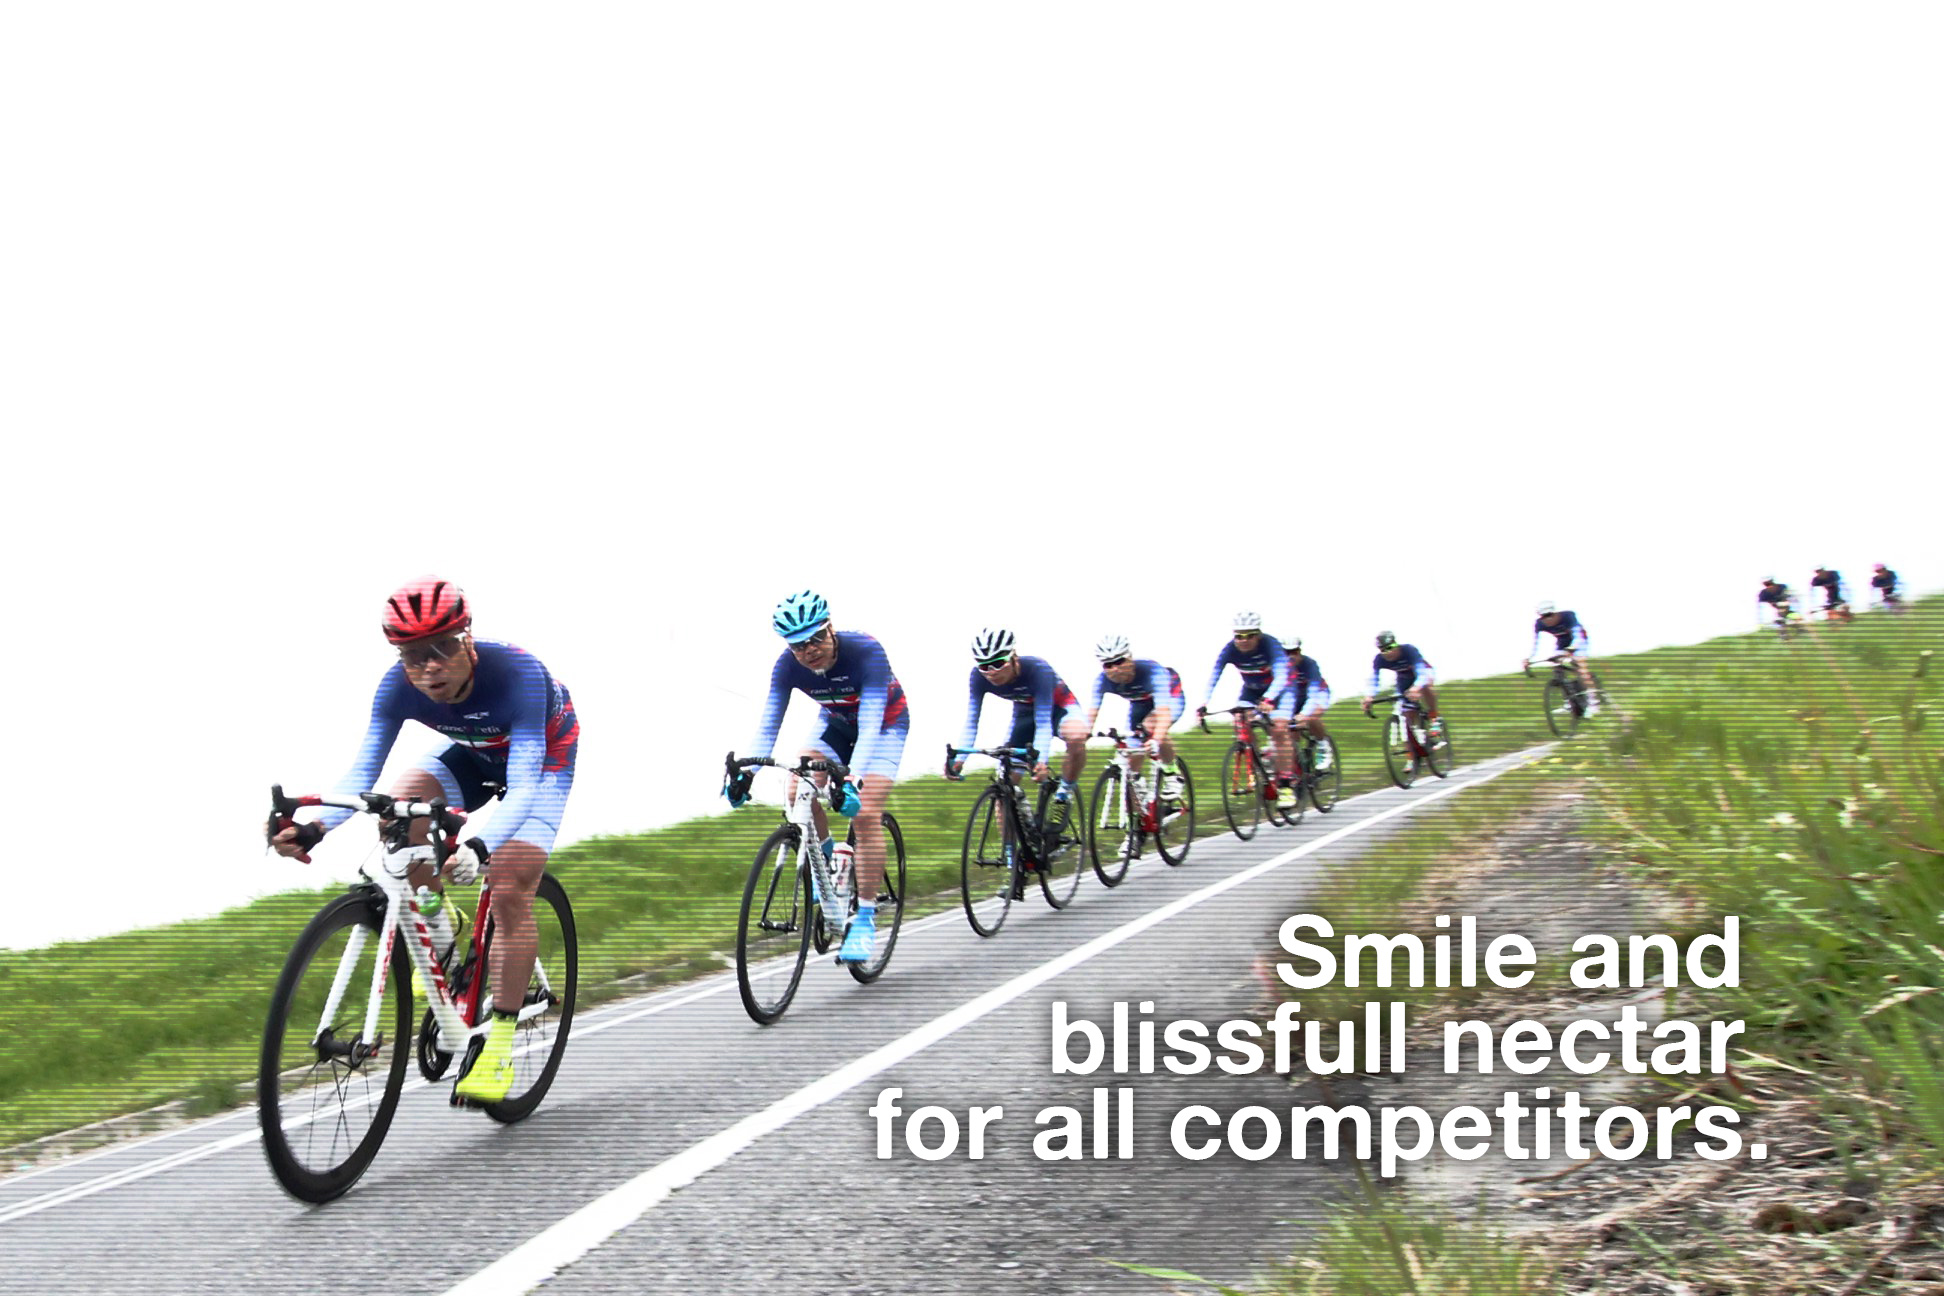 Cycle Road Race Team Grandi Petit - Smile and blissful nectar for all competitors.